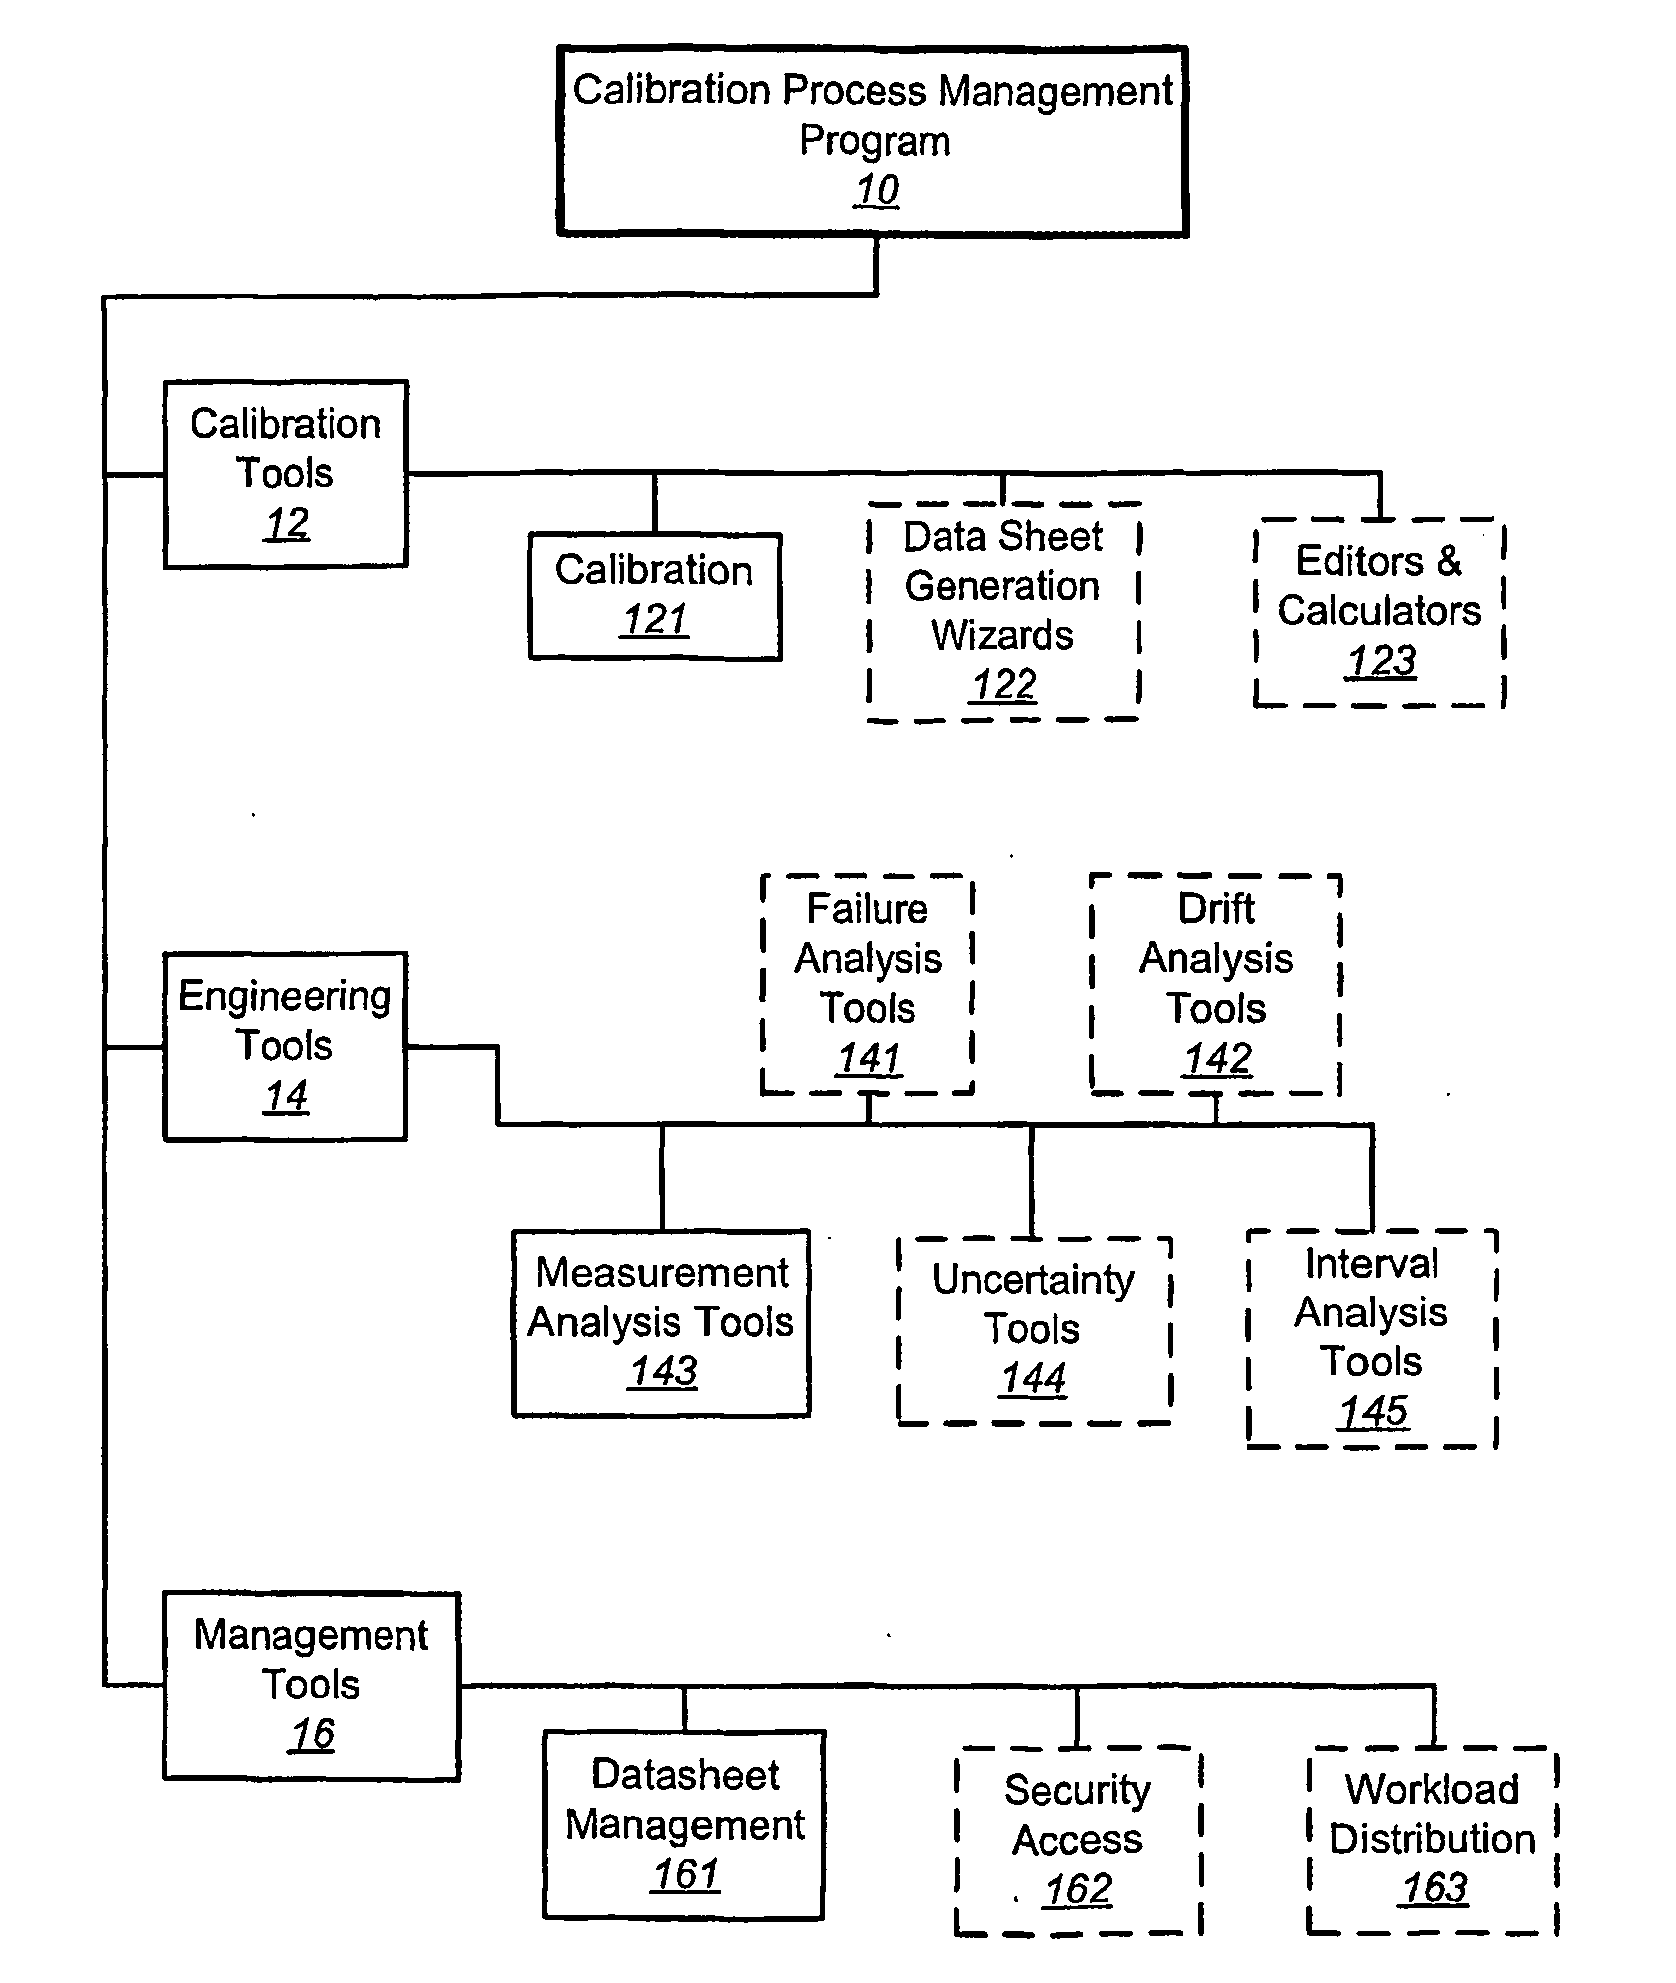 Calibration process management system and data structure